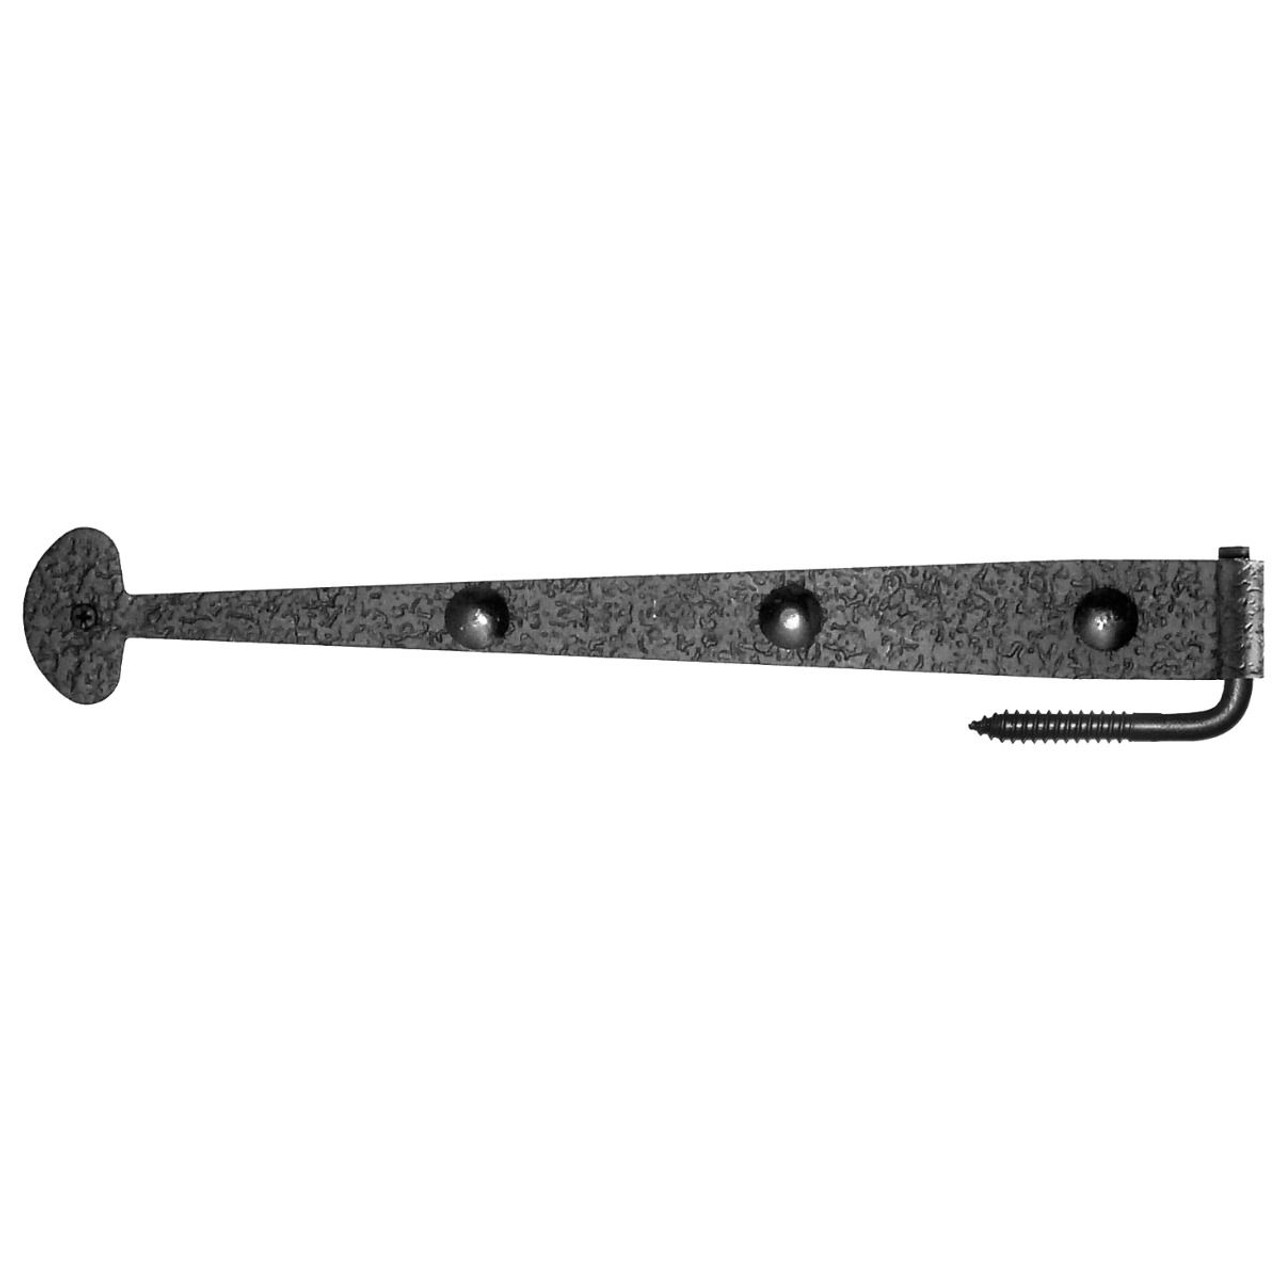 Acorn 15-5/8" Rough Bean Gate Strap Hinge with Carriage Bolts & Pintle RITBP